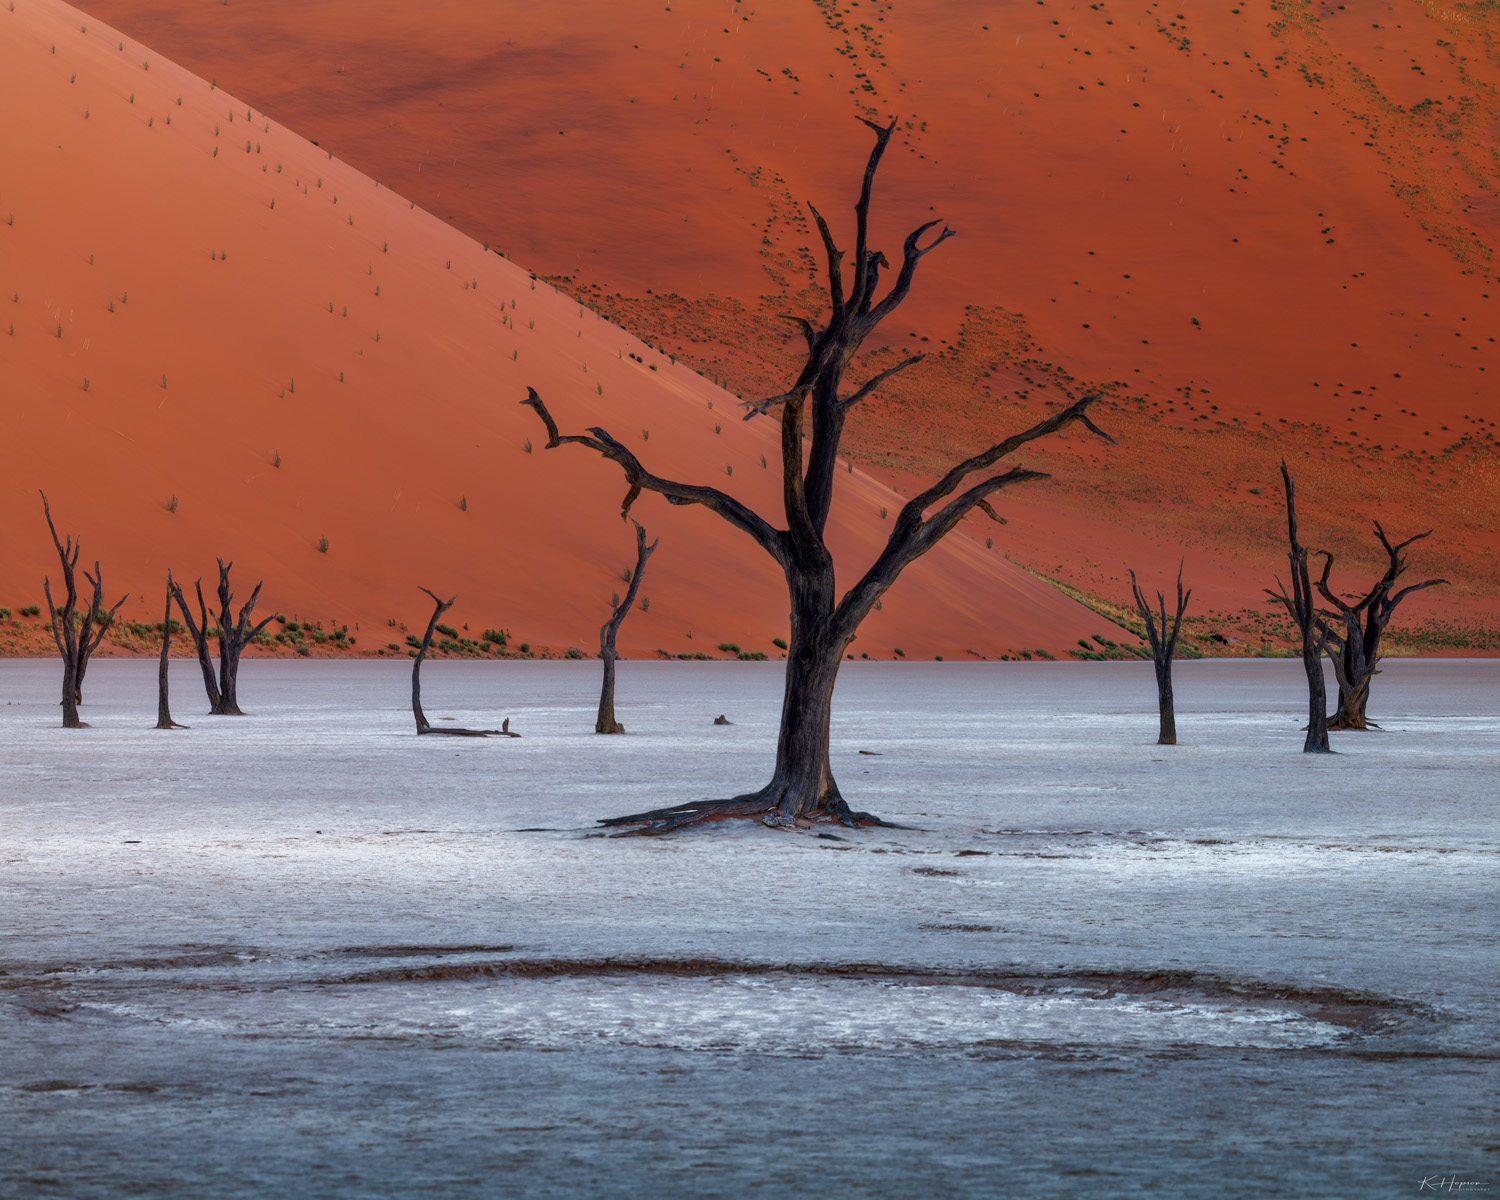 800 year old dead trees at the base of giant red dunes in Deadvlei, Namibia